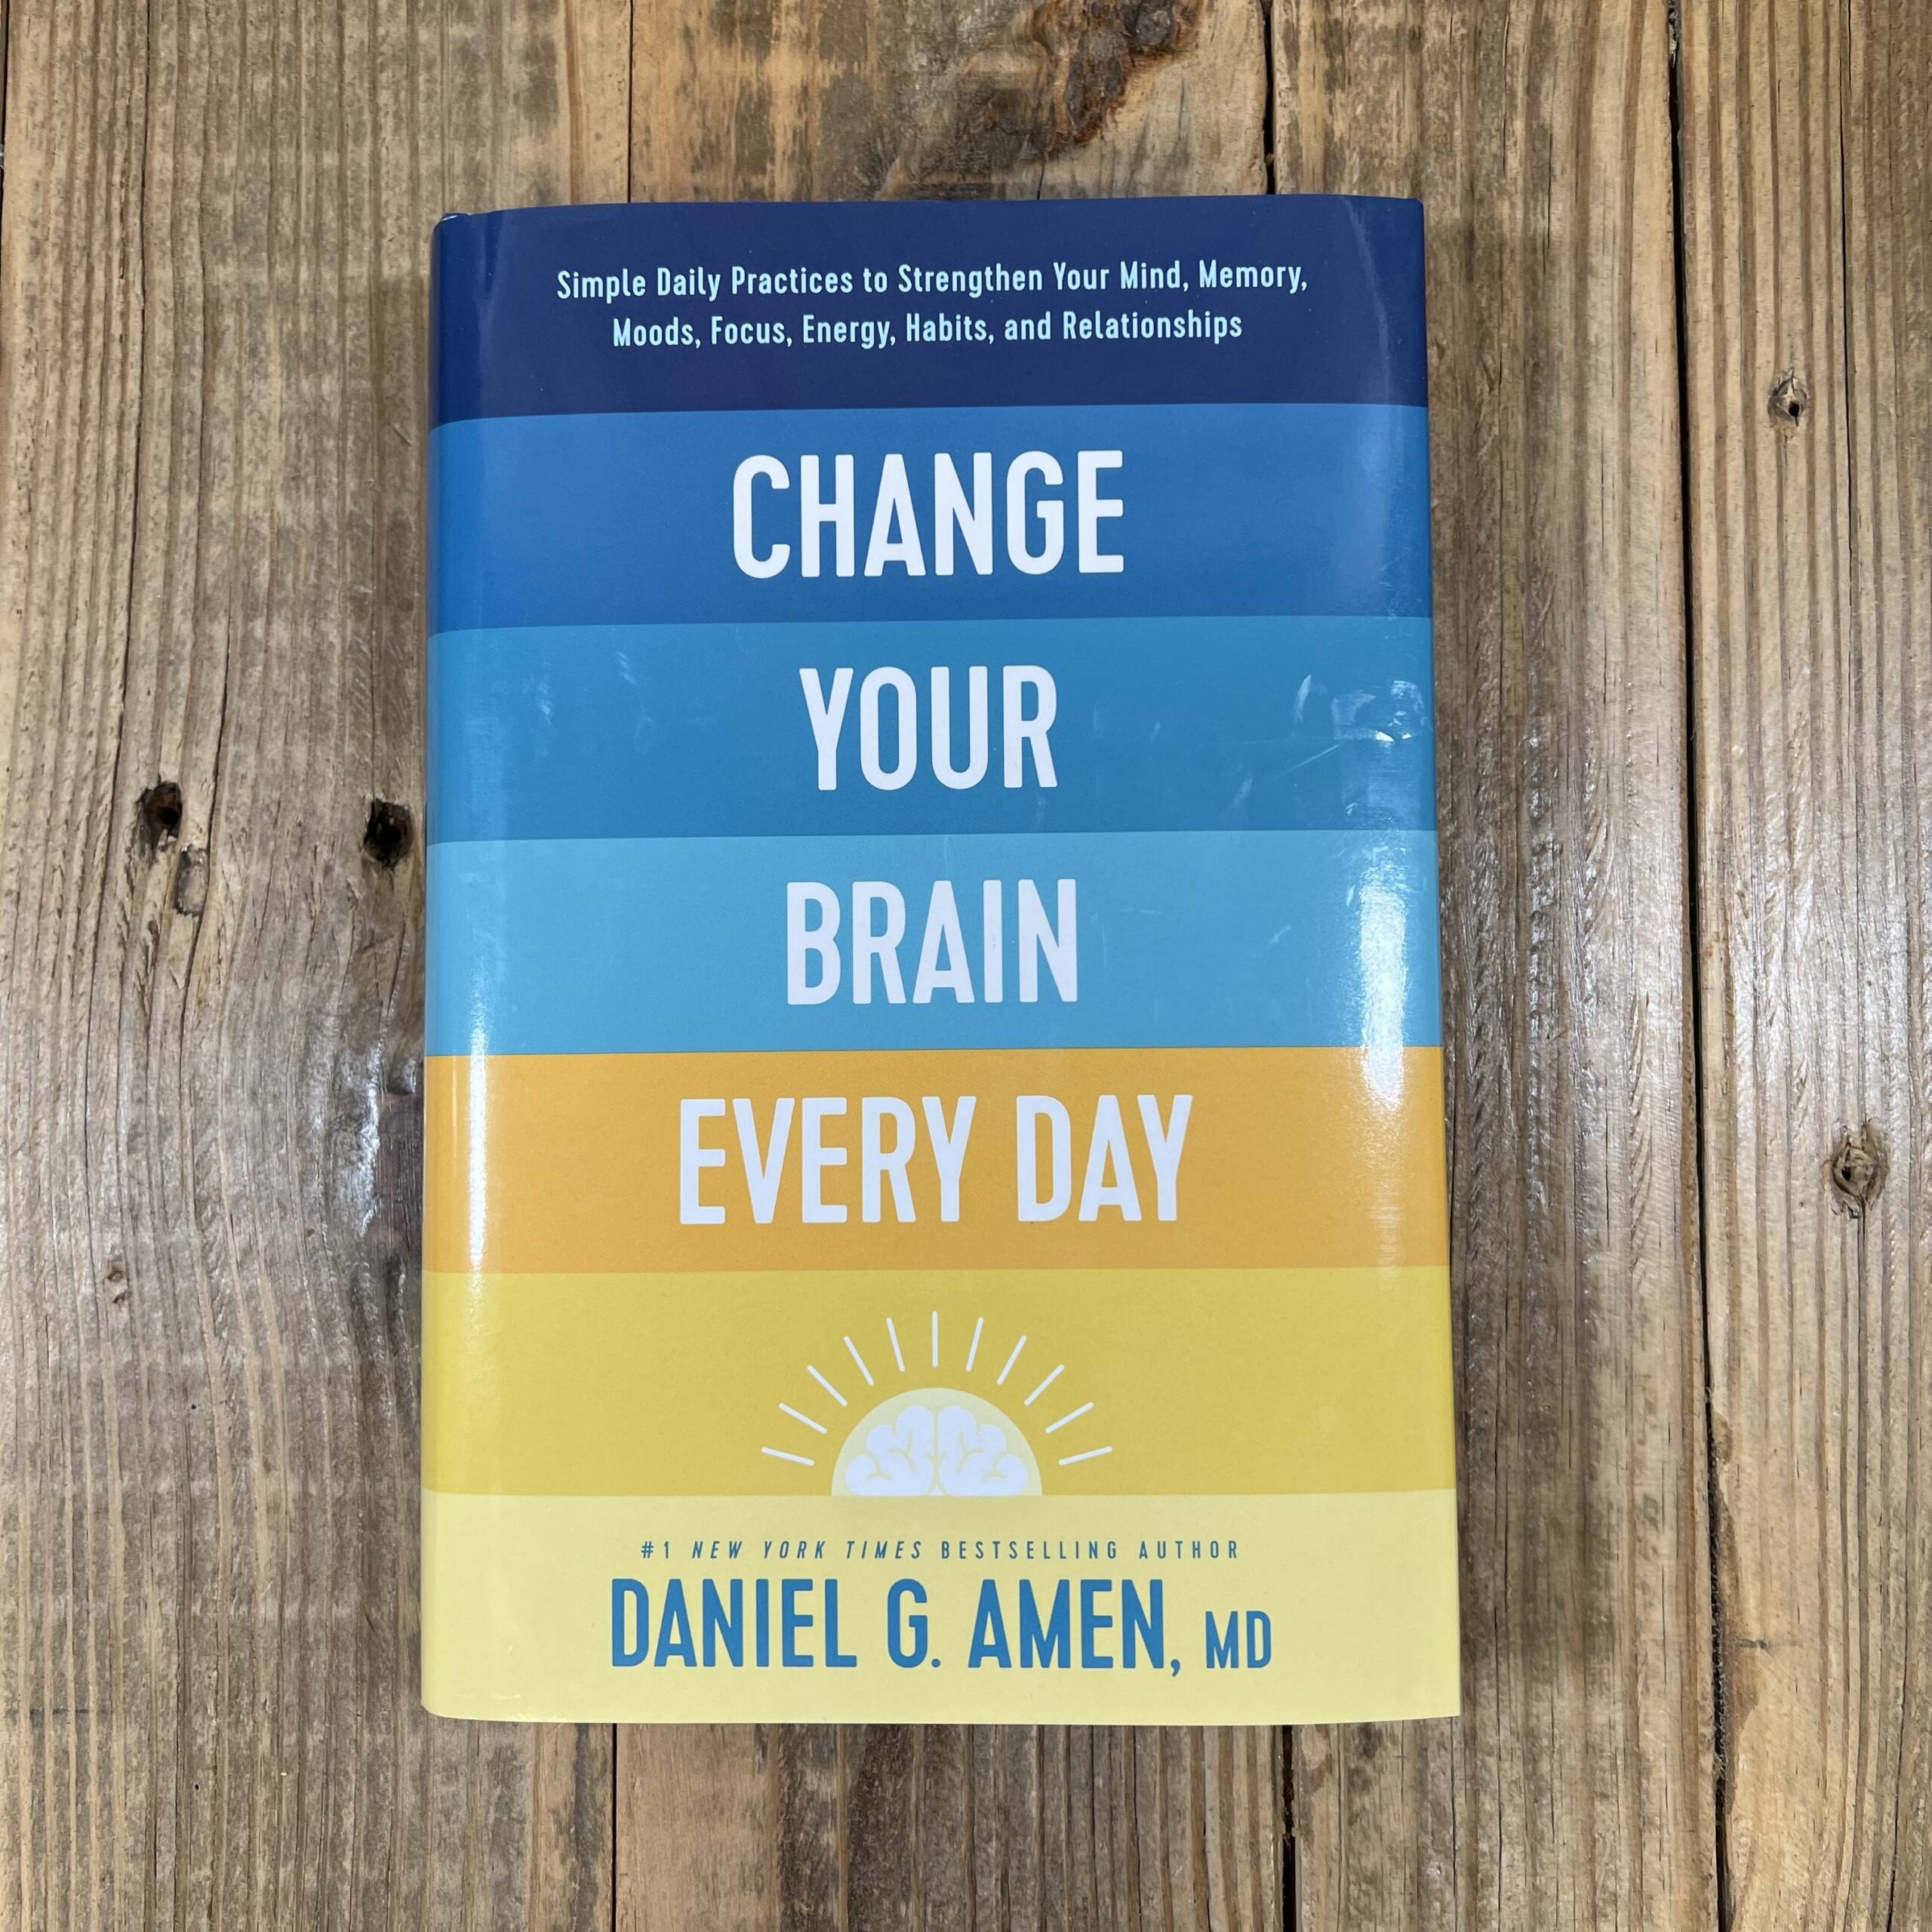 Change Your Brain Every Day: Simple Daily Practices to Strengthen Your Mind,  Memory, Moods, Focus, Energy, Habits, and Relationships - eBook: Daniel G.  Amen, SELF-HELP Emotions: 9781496454607 